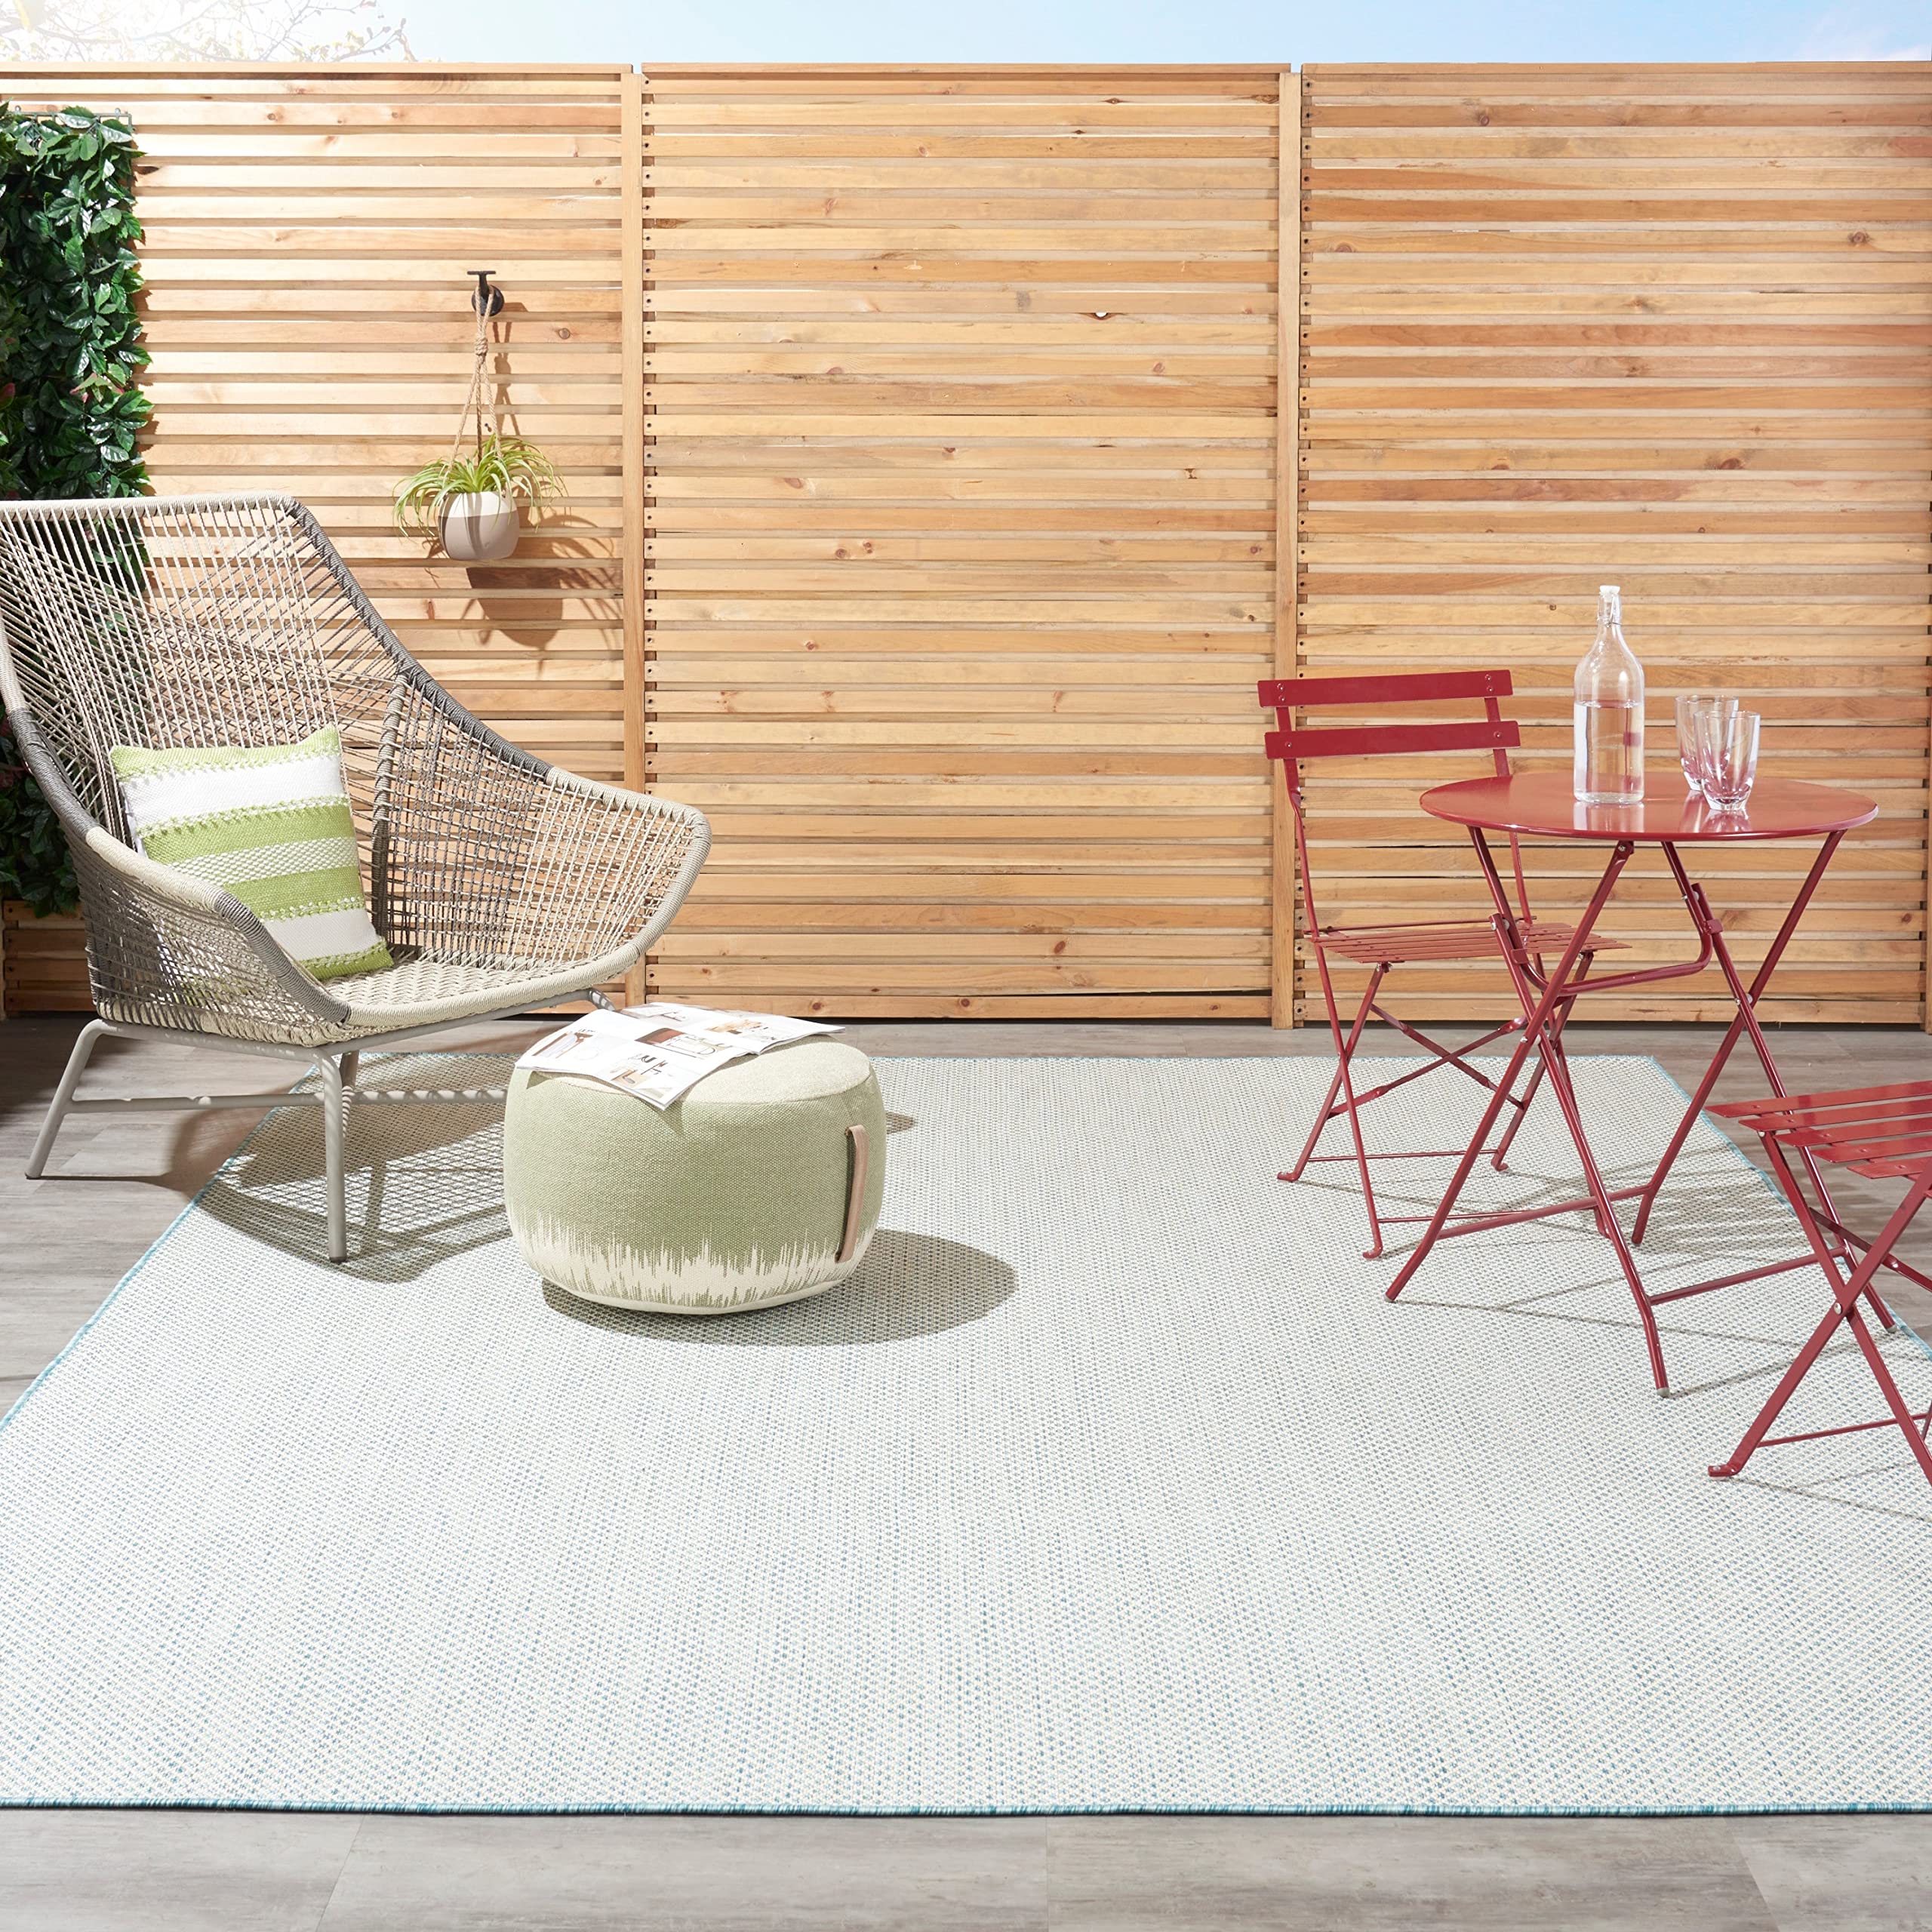 Nourison Courtyard Indoor/Outdoor Area Rug 5' x 7', Ivory Aqua, Rectangular Geometric Easy Cleaning Non Shedding Bed Room Living